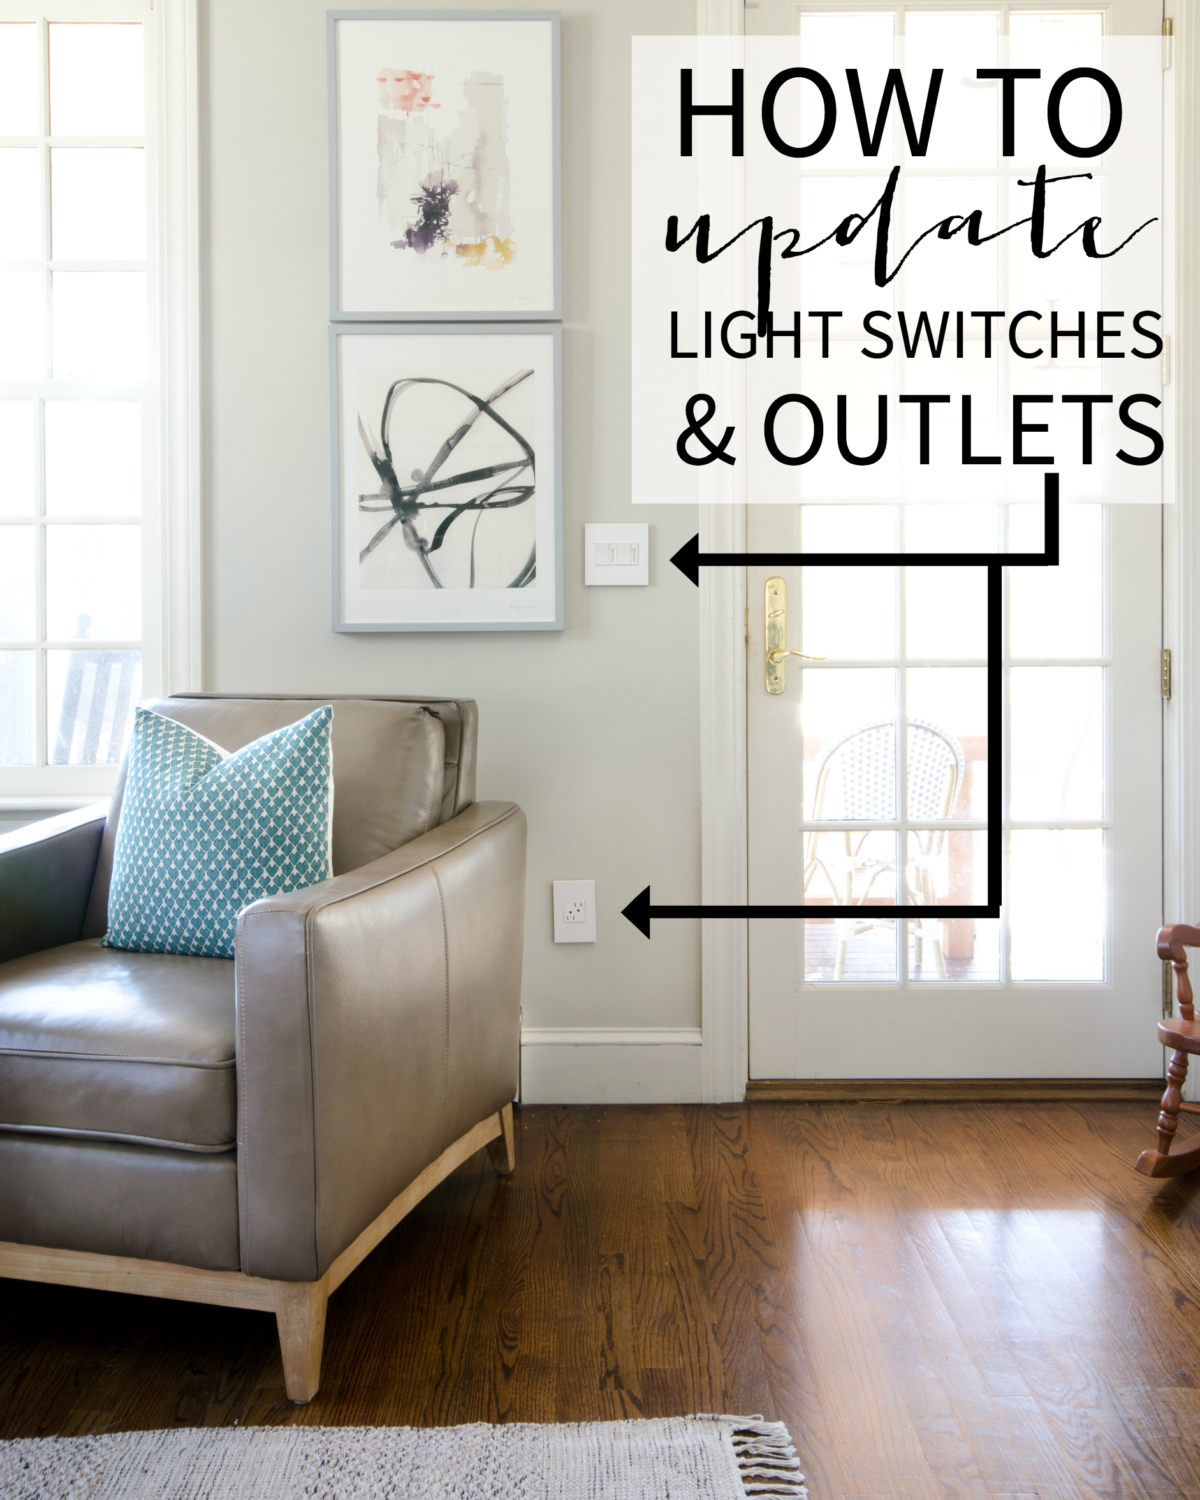 How to update light switches and outlets for a fresh look. Includes a video tutorial!